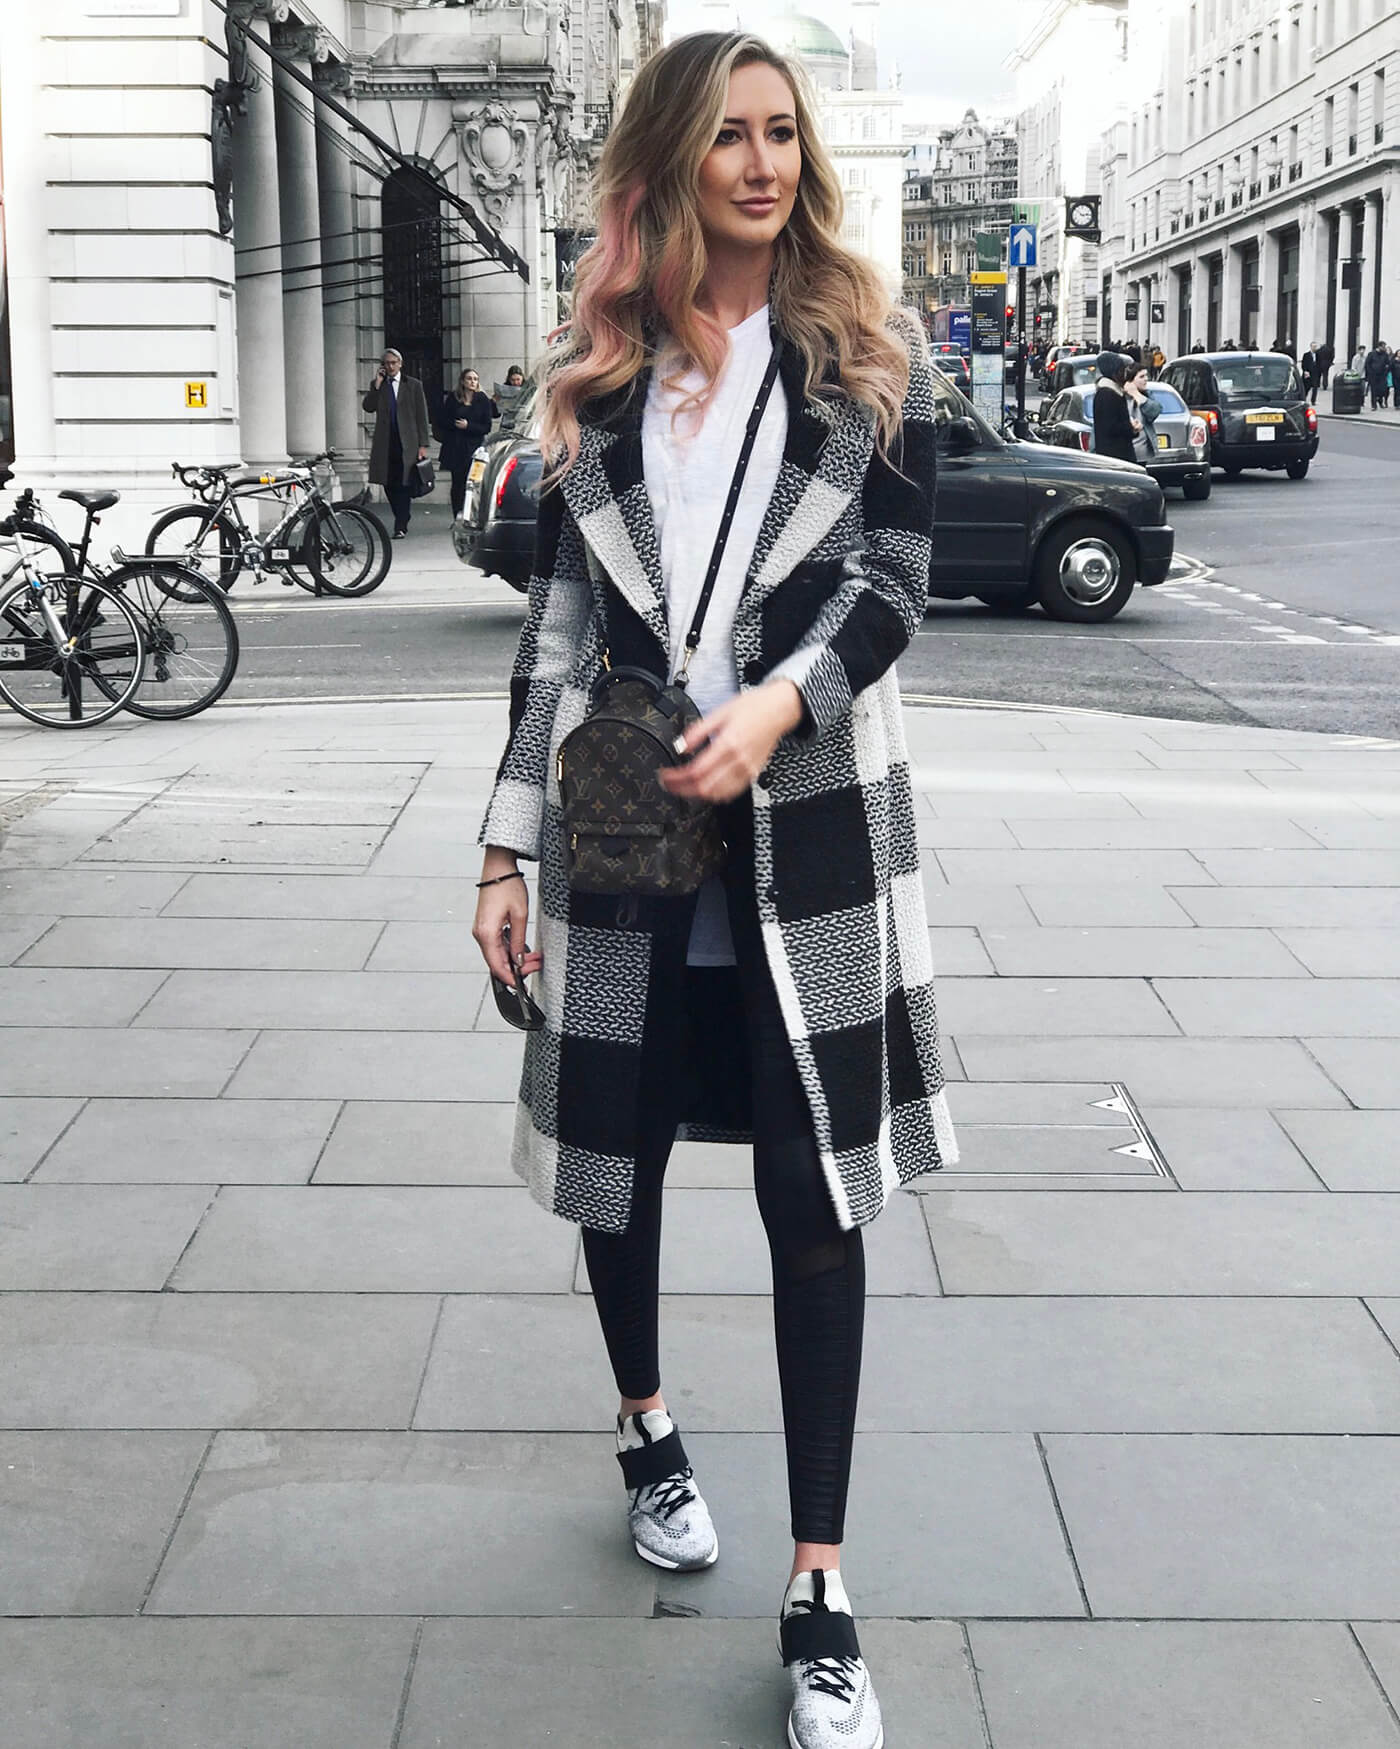 Carly Cristman in London wearing a plaid coat with nike air zoom sneakers and moto leggings